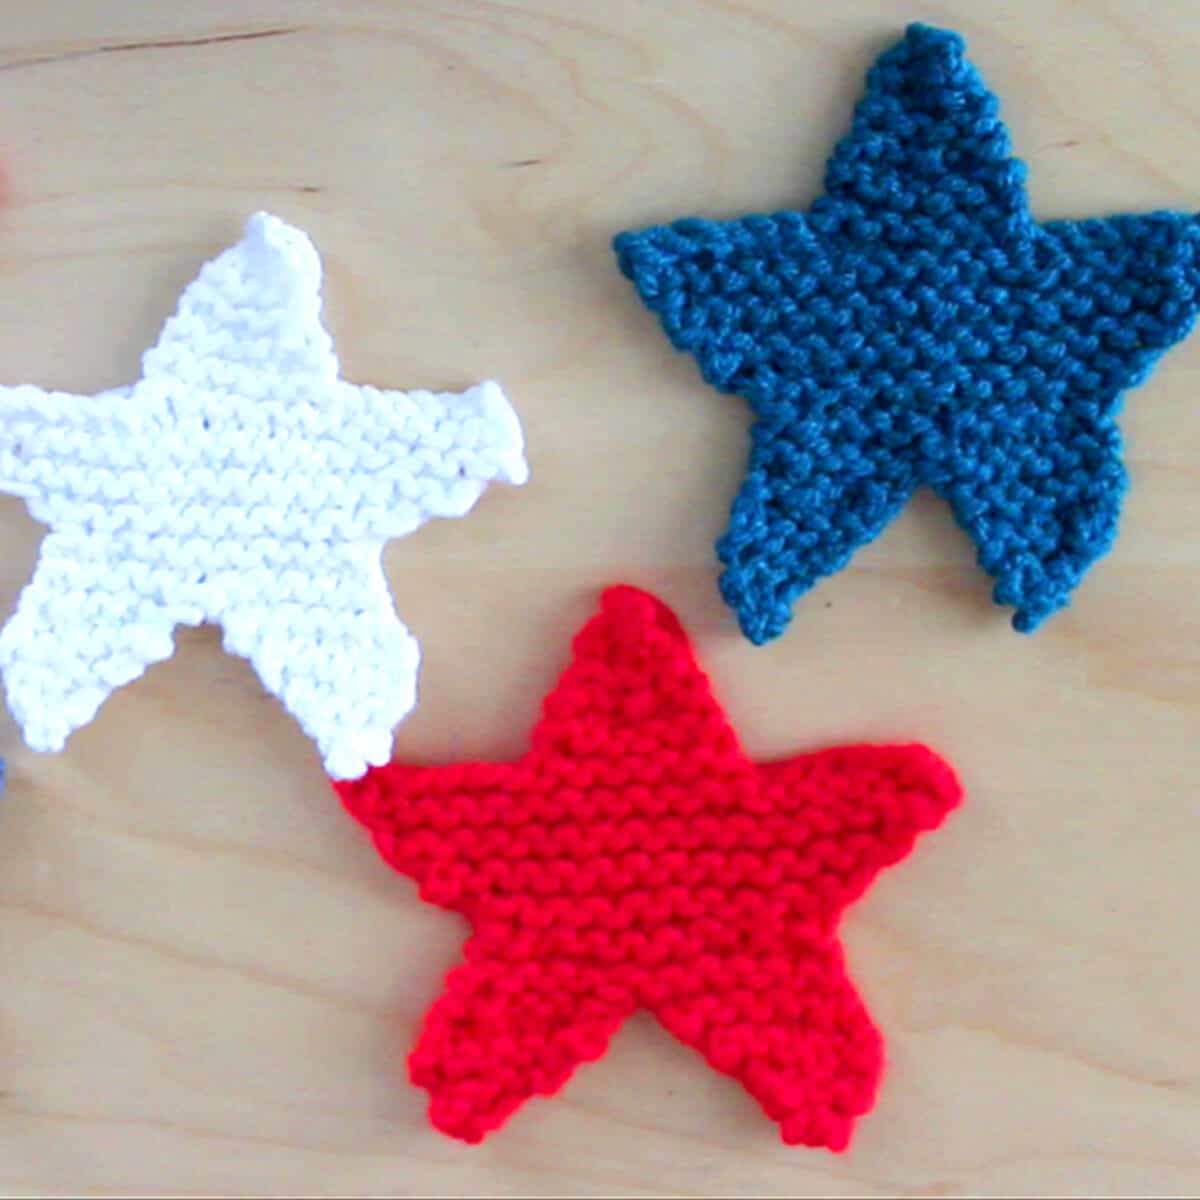 3 Knitted Star Shapes in red, white, and blue yarn colors.